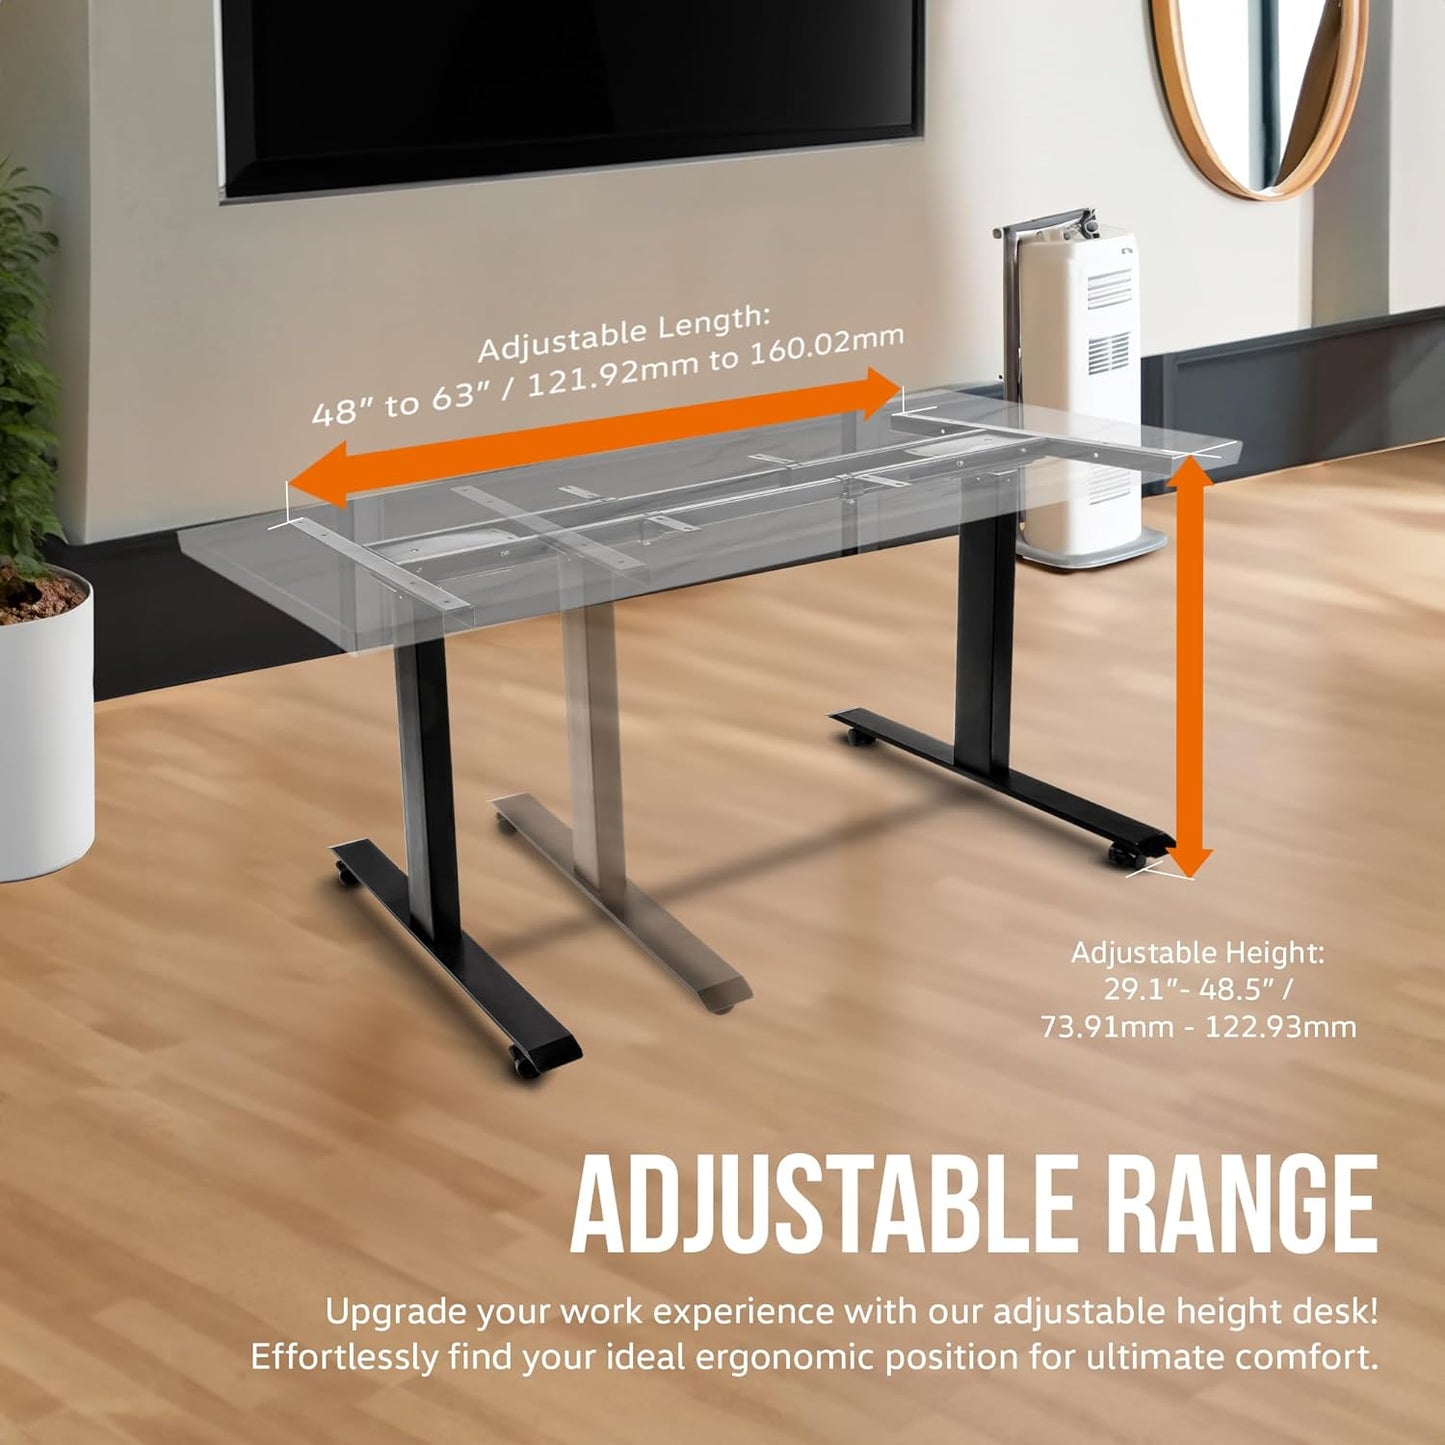 SuperHandy Standing Desk Frame Adjustable Height (Supports Table Tops 48''- 63" x 30'') USB-C & AC Outlets, 3 Memory Presets - Electric Sit-Stand Adjustable Height up to 49'' - Frame Only (63 x 30, Fra